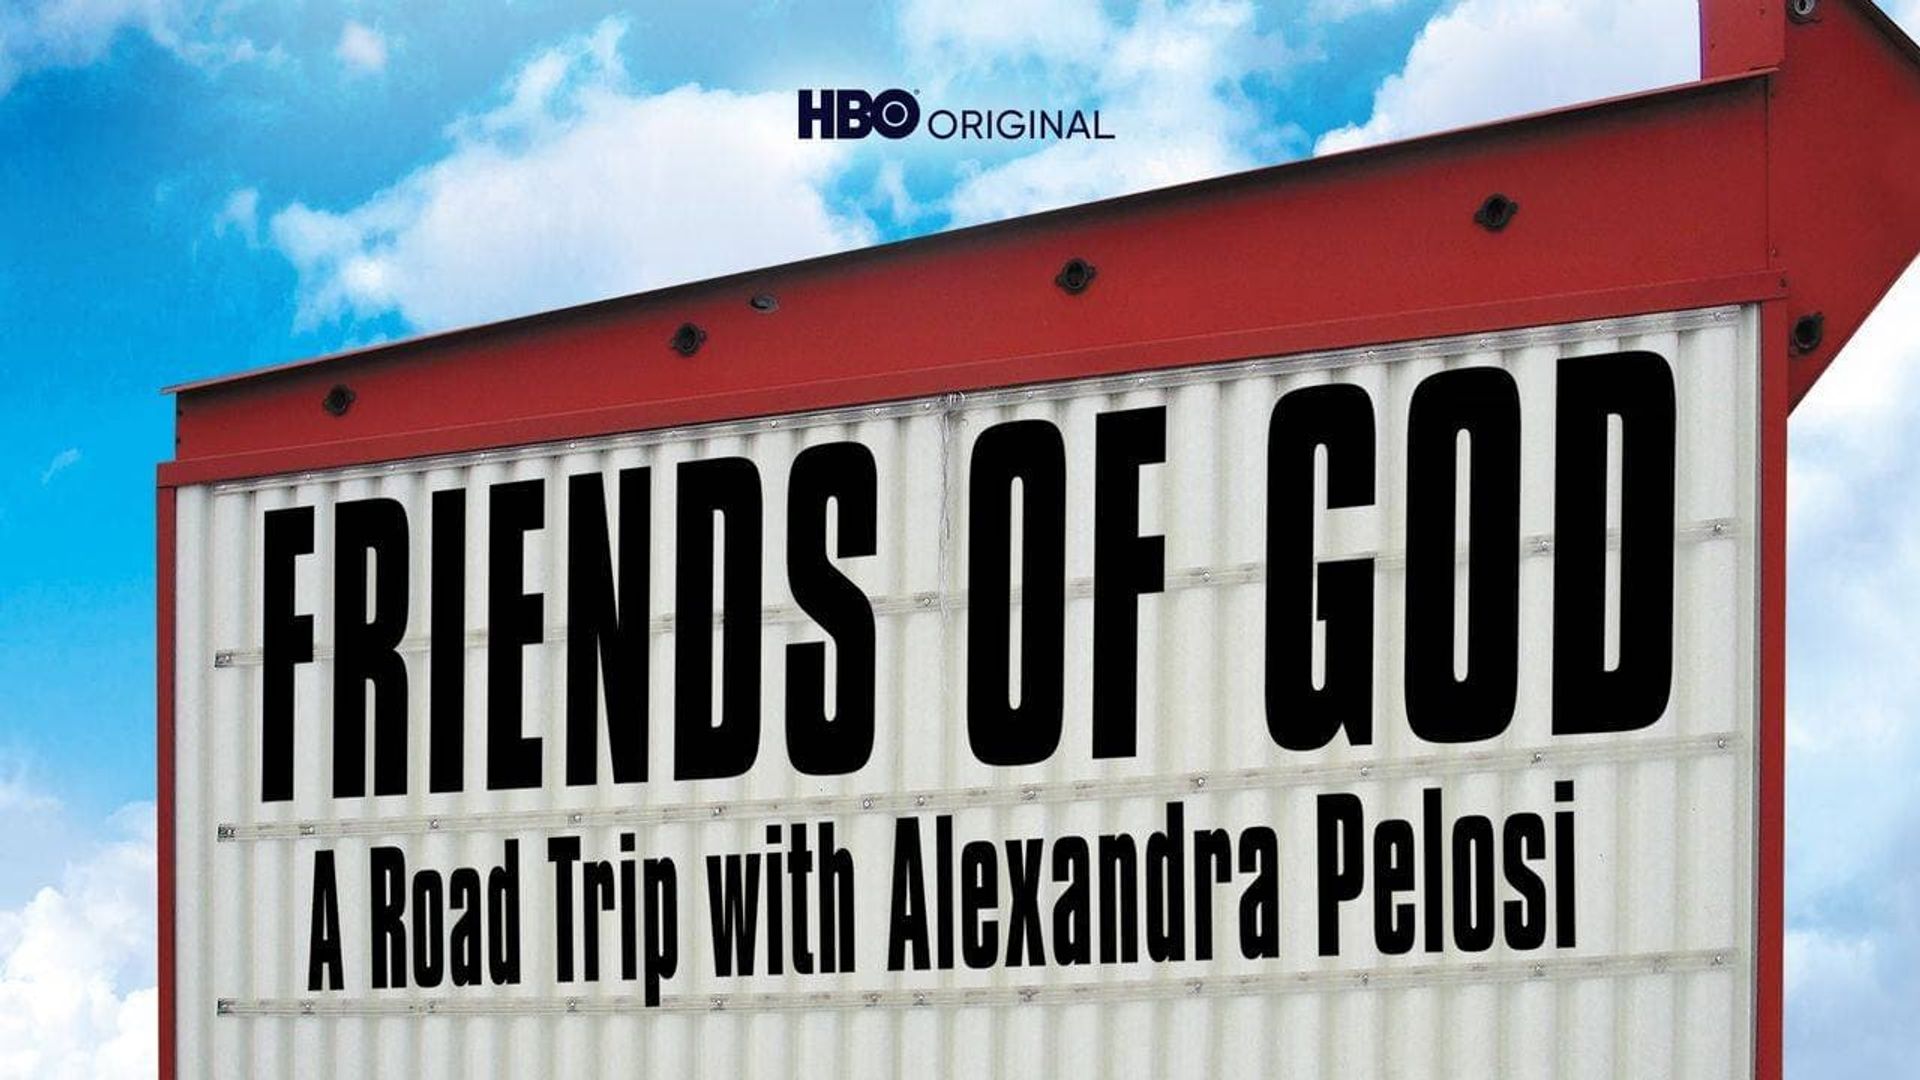 Friends of God: A Road Trip with Alexandra Pelosi background